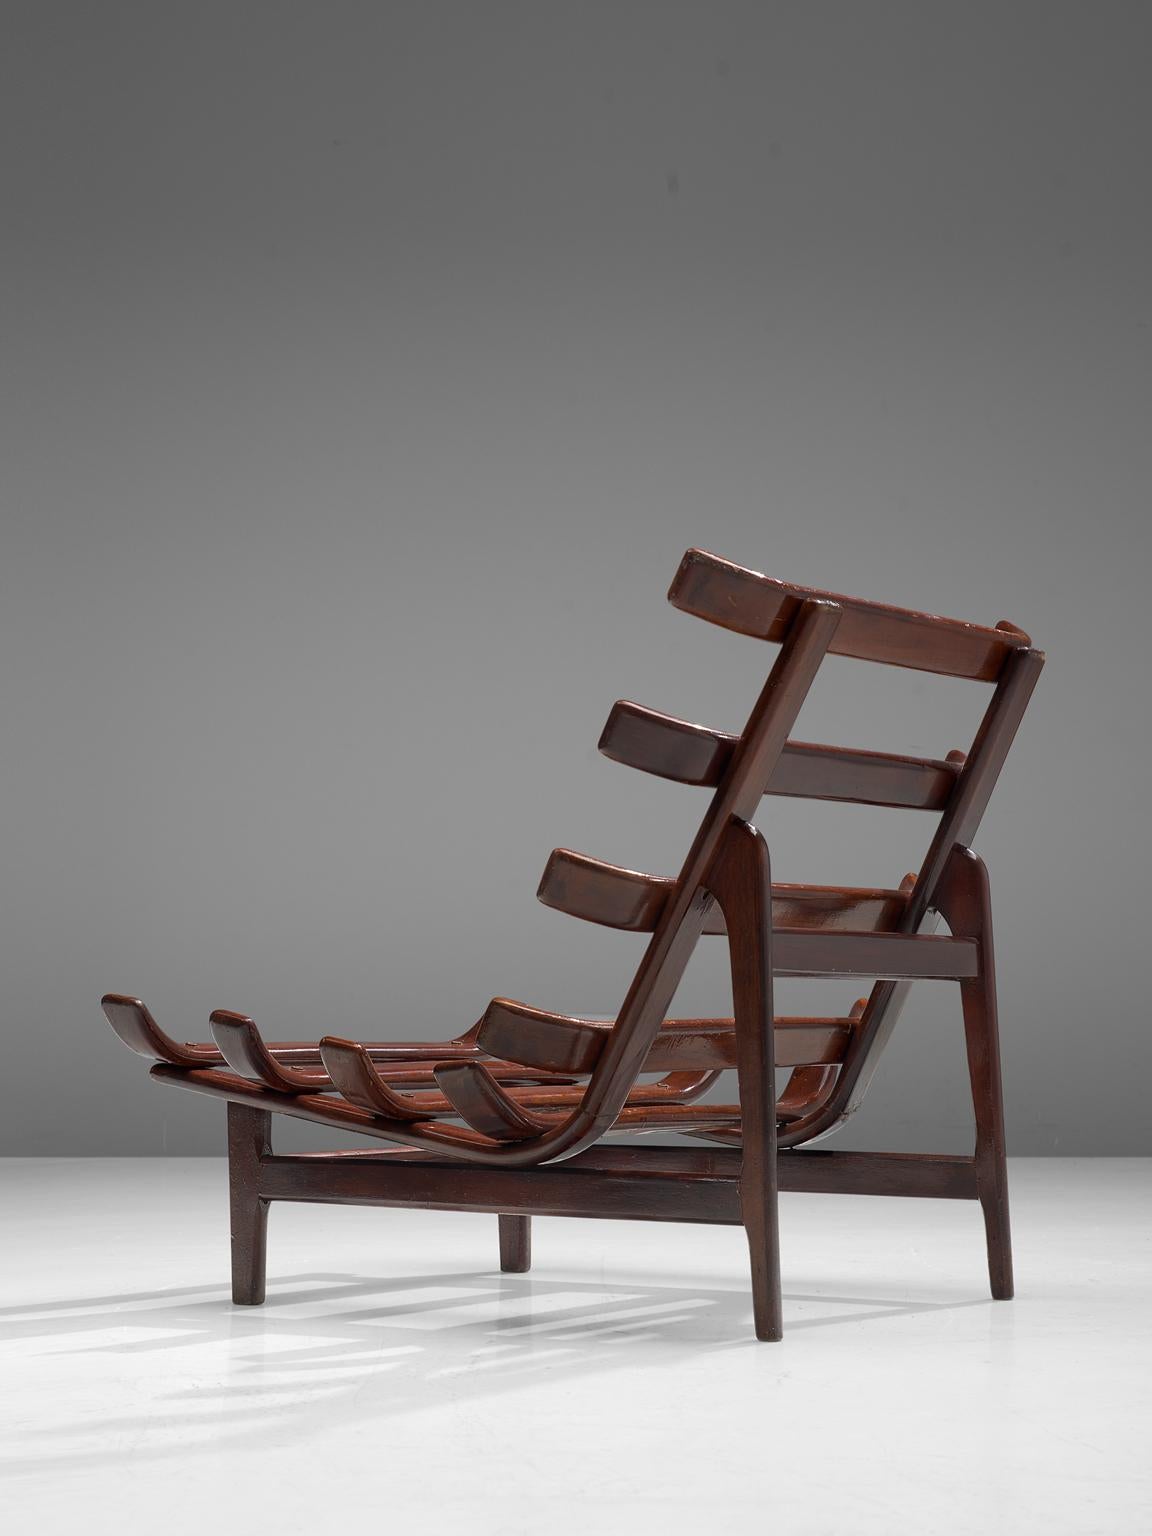 Brazilian Lounge Chair in Solid Rosewood Frame by Móveis Pailar.